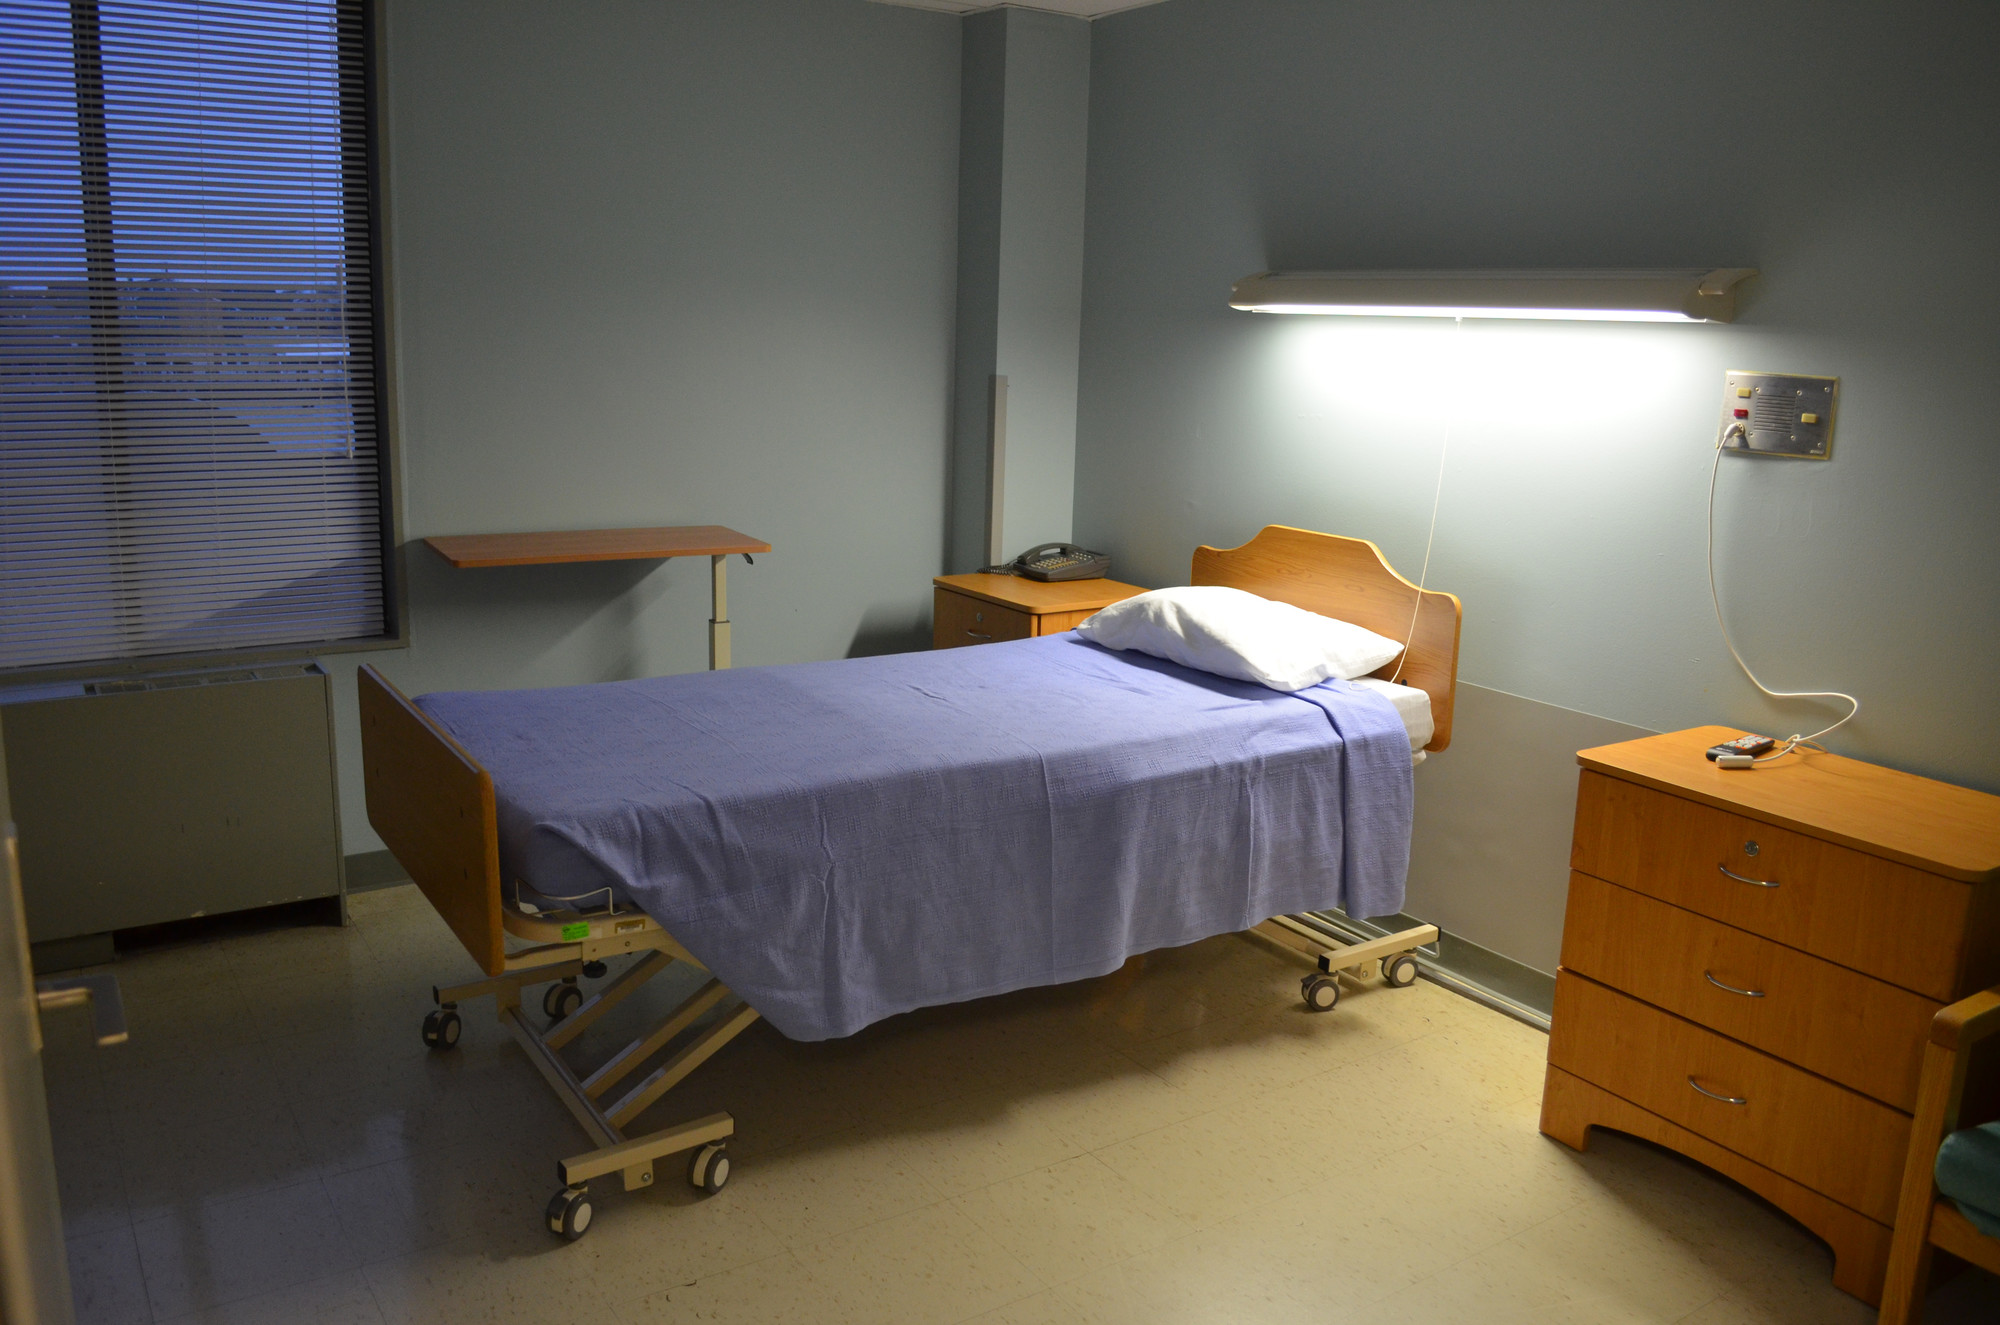 A newly designed room in the rehabilitation center.